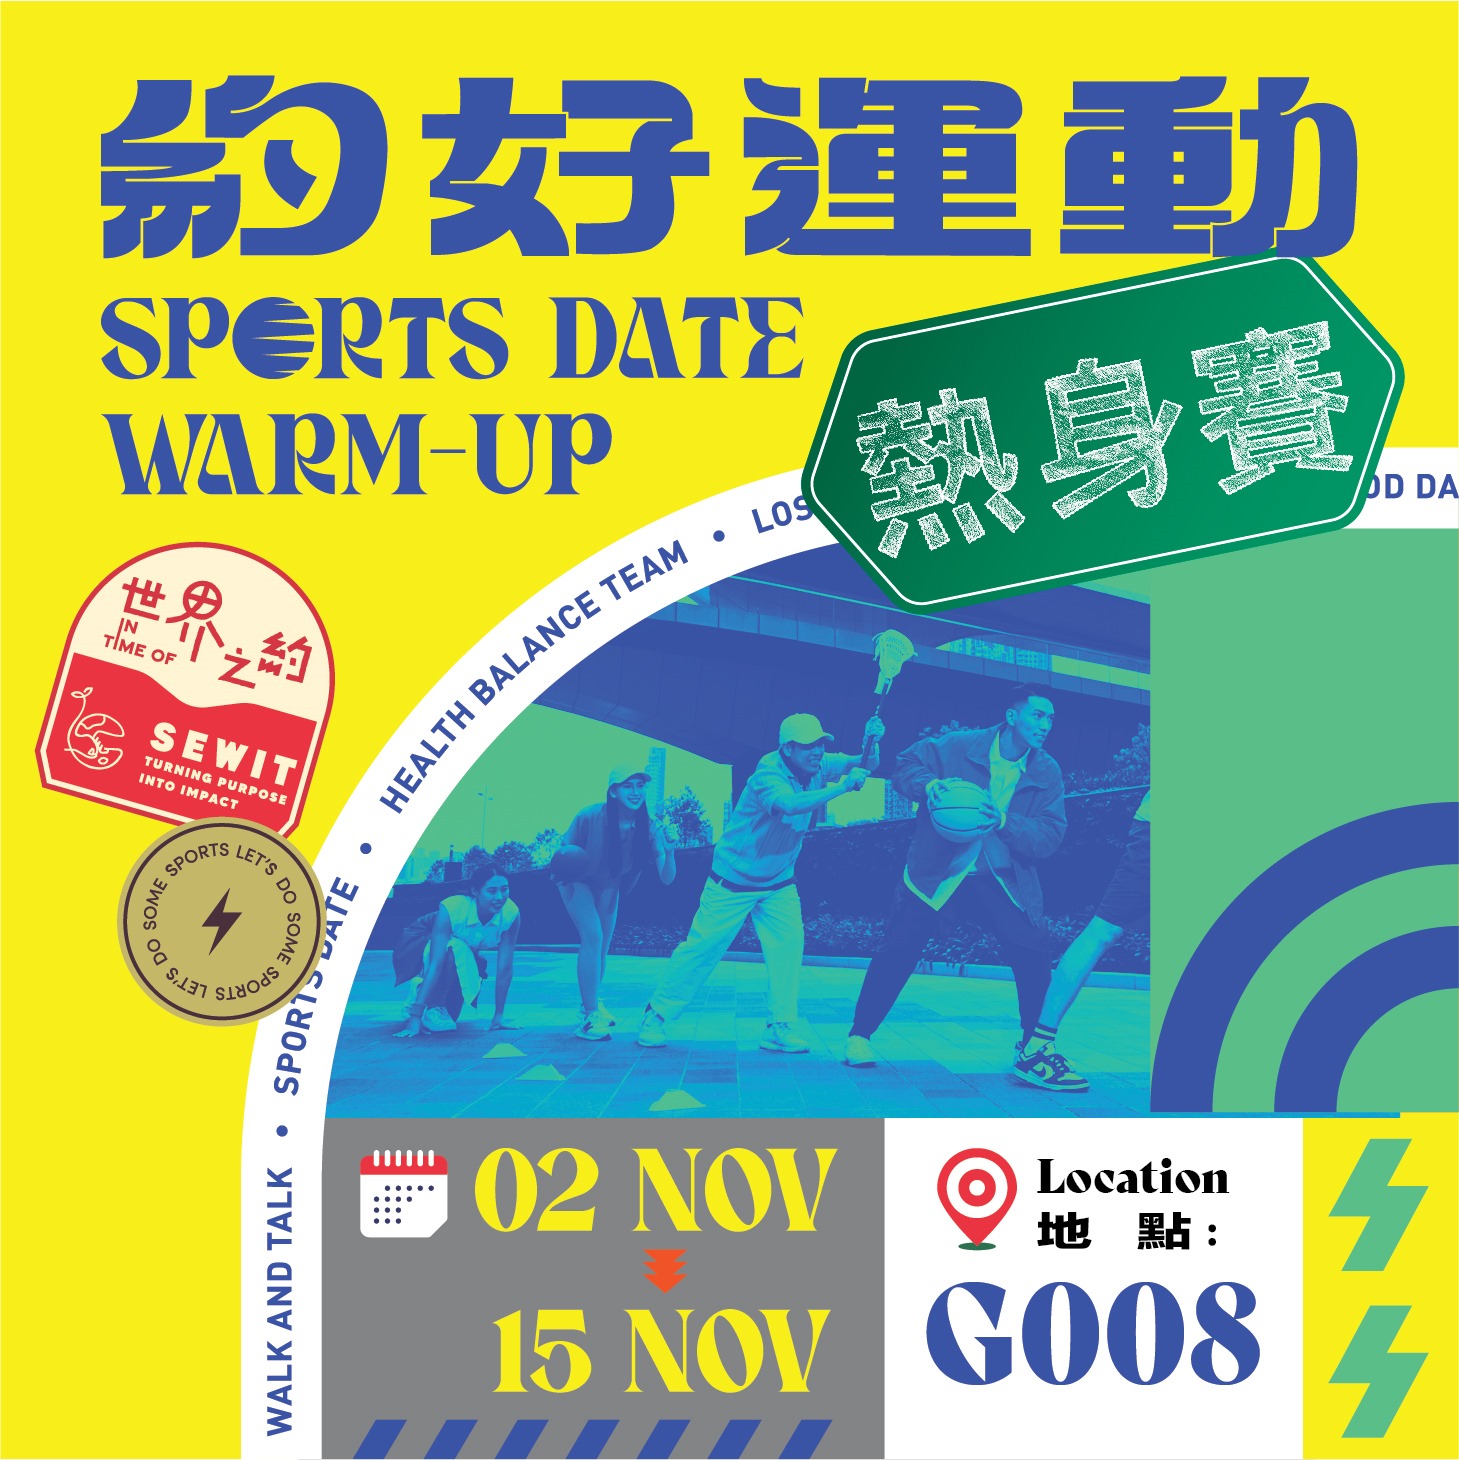 November Sports Date Warm-up @AIRSIDE